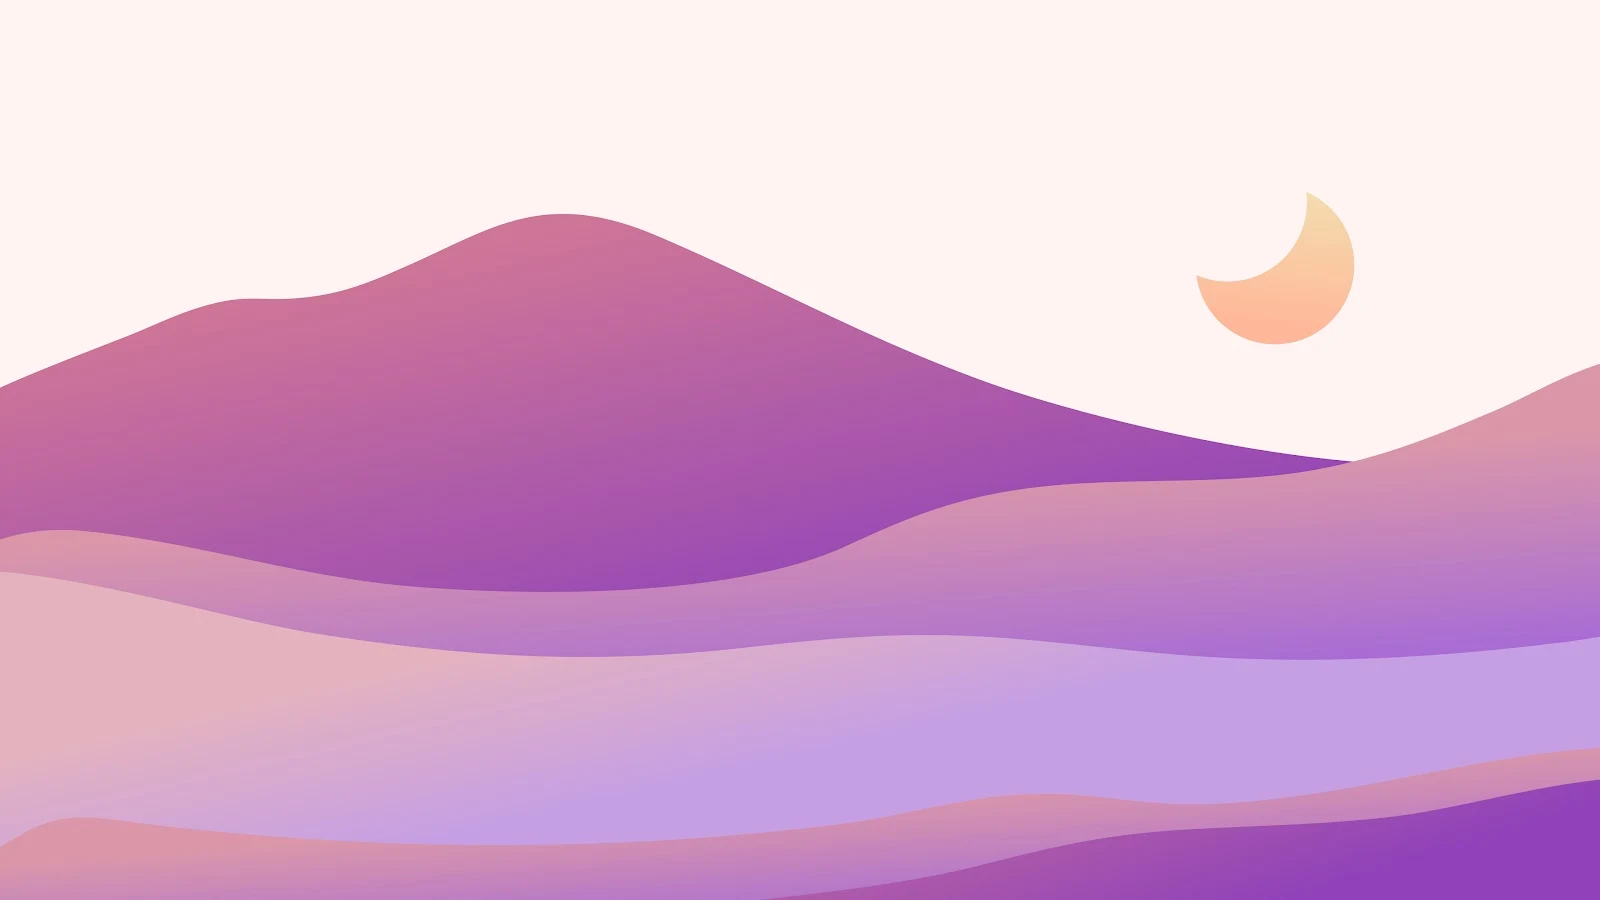 Abstract minimalist hills under a crescent moon in a pastel purple sky.